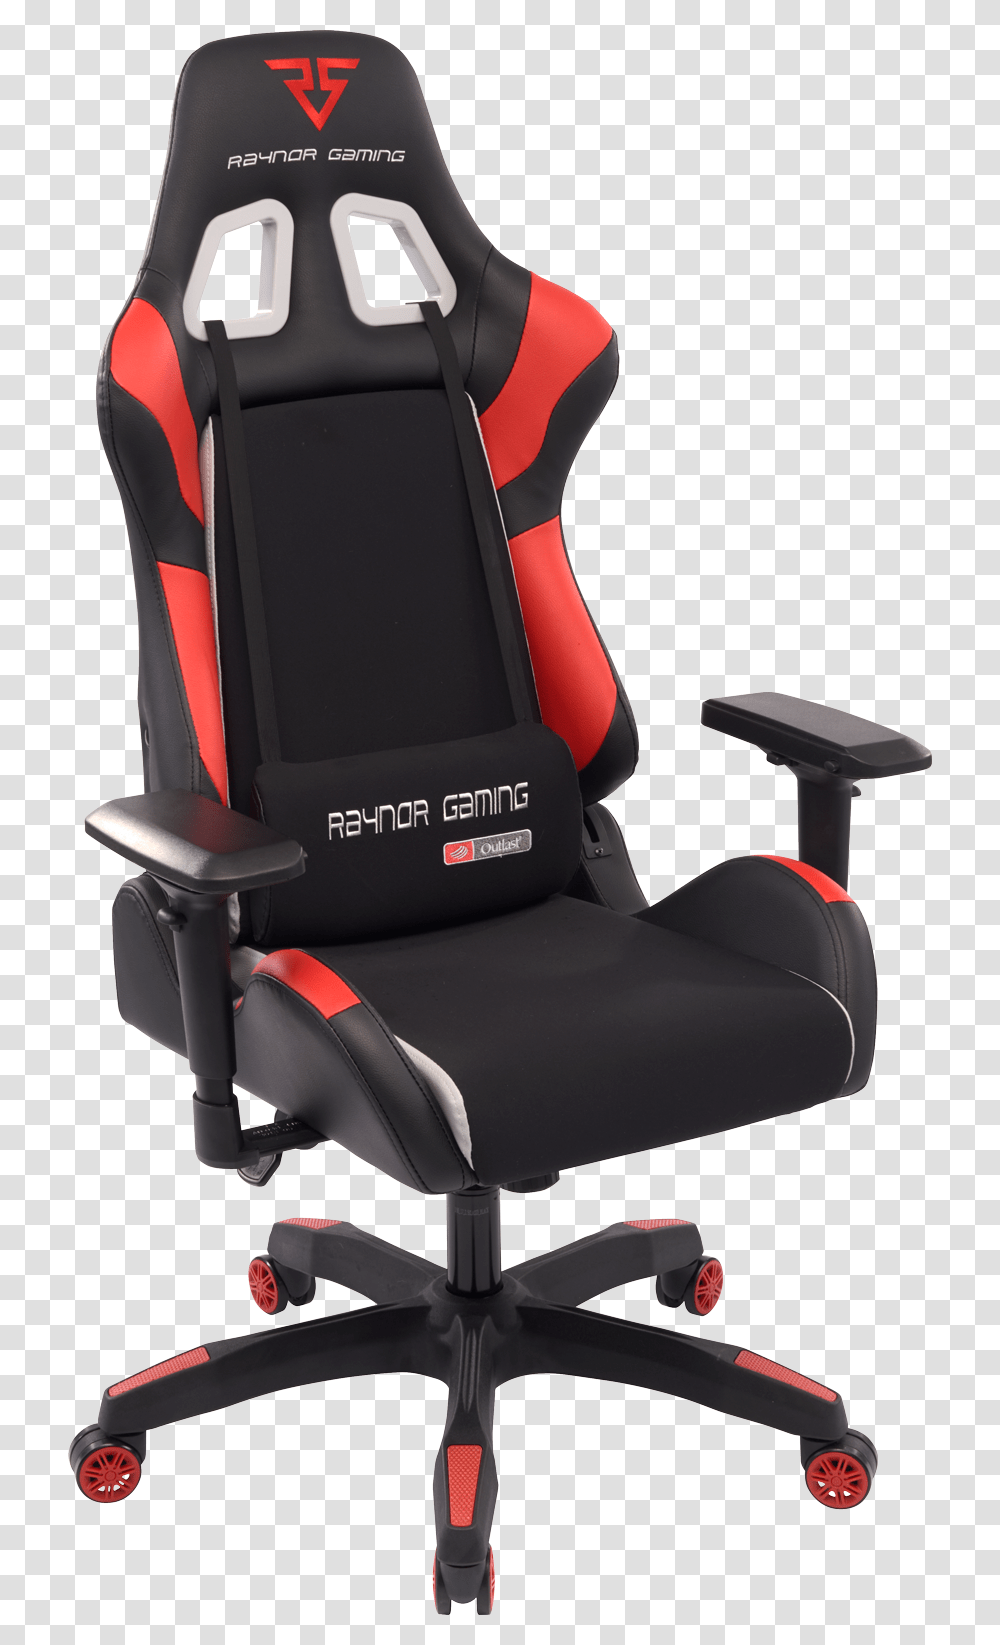 Energy Pro In Red Raynor Gaming Chair, Cushion, Furniture, Headrest, Car Seat Transparent Png